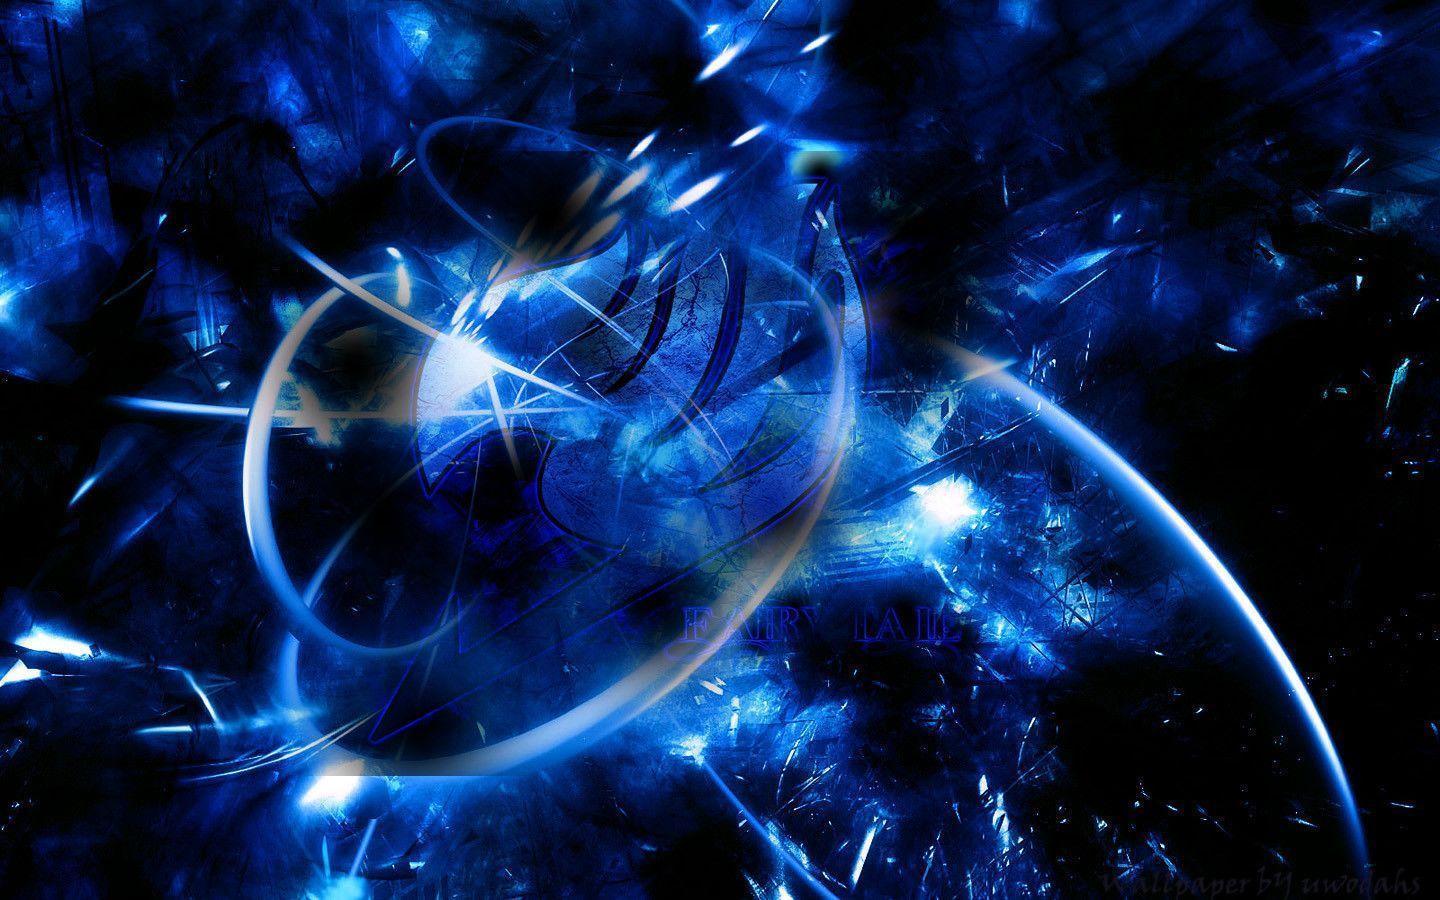 Blue Fairy Tail in Abstract